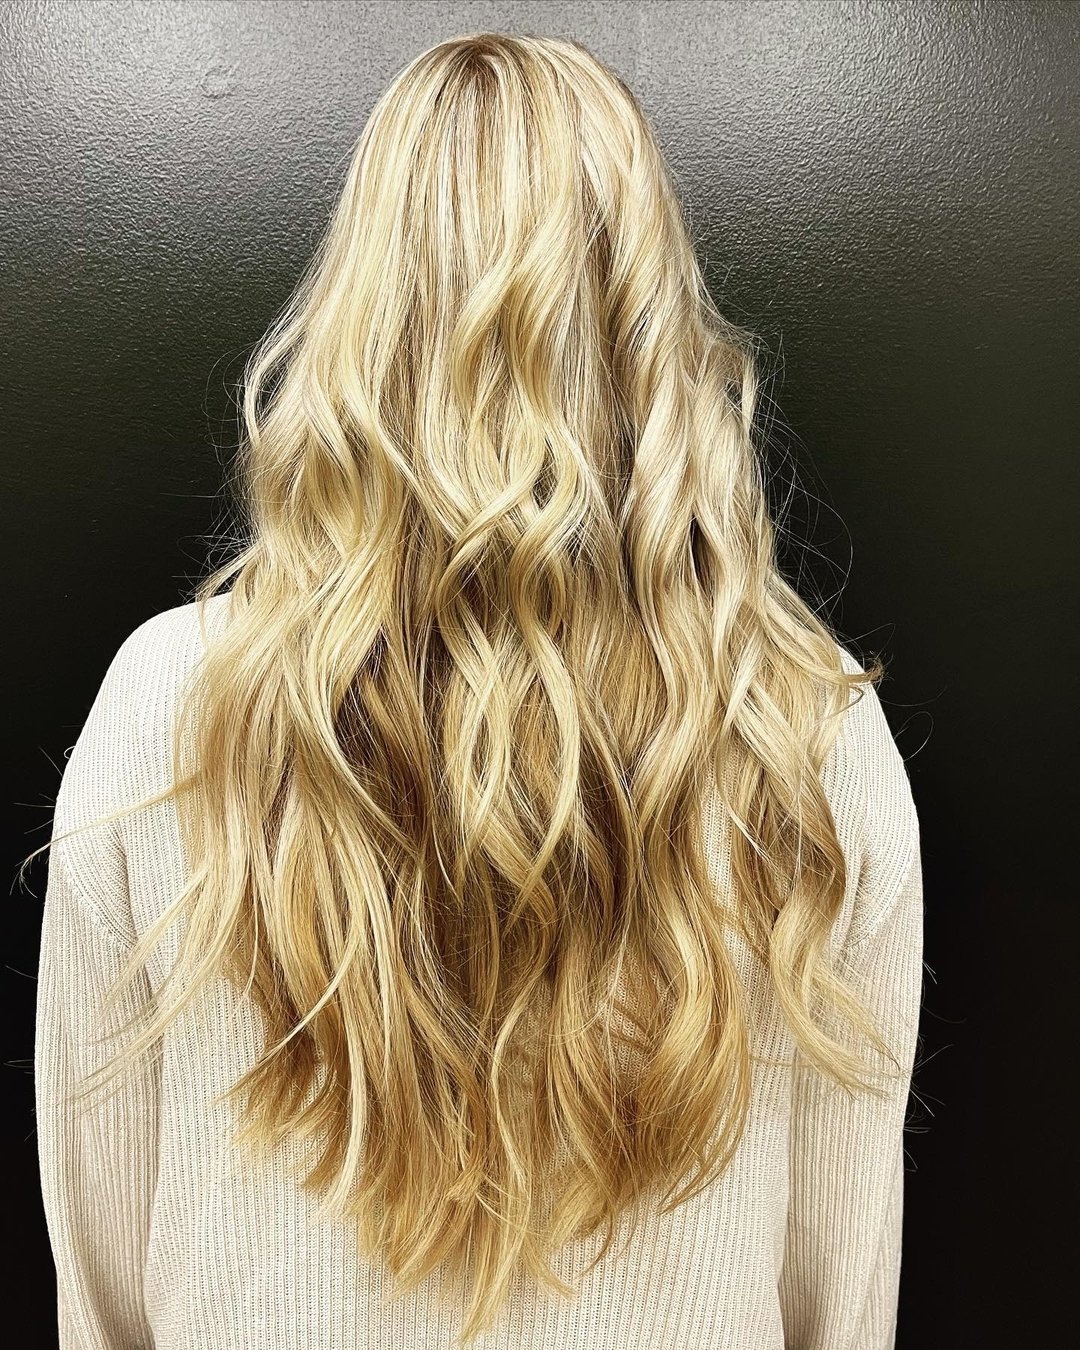 Blonde foil highlights for Dime Samantha ☀️

Styled with Bumble and bumble Heat Shield Blow Dry Accelerator and Spray De Mode Hairspray 

#dimelife #feelinlikeadime #bumbleandbumble #bbnetworksalon  #highlights #foils #wellahair #blonde #wellablonde 